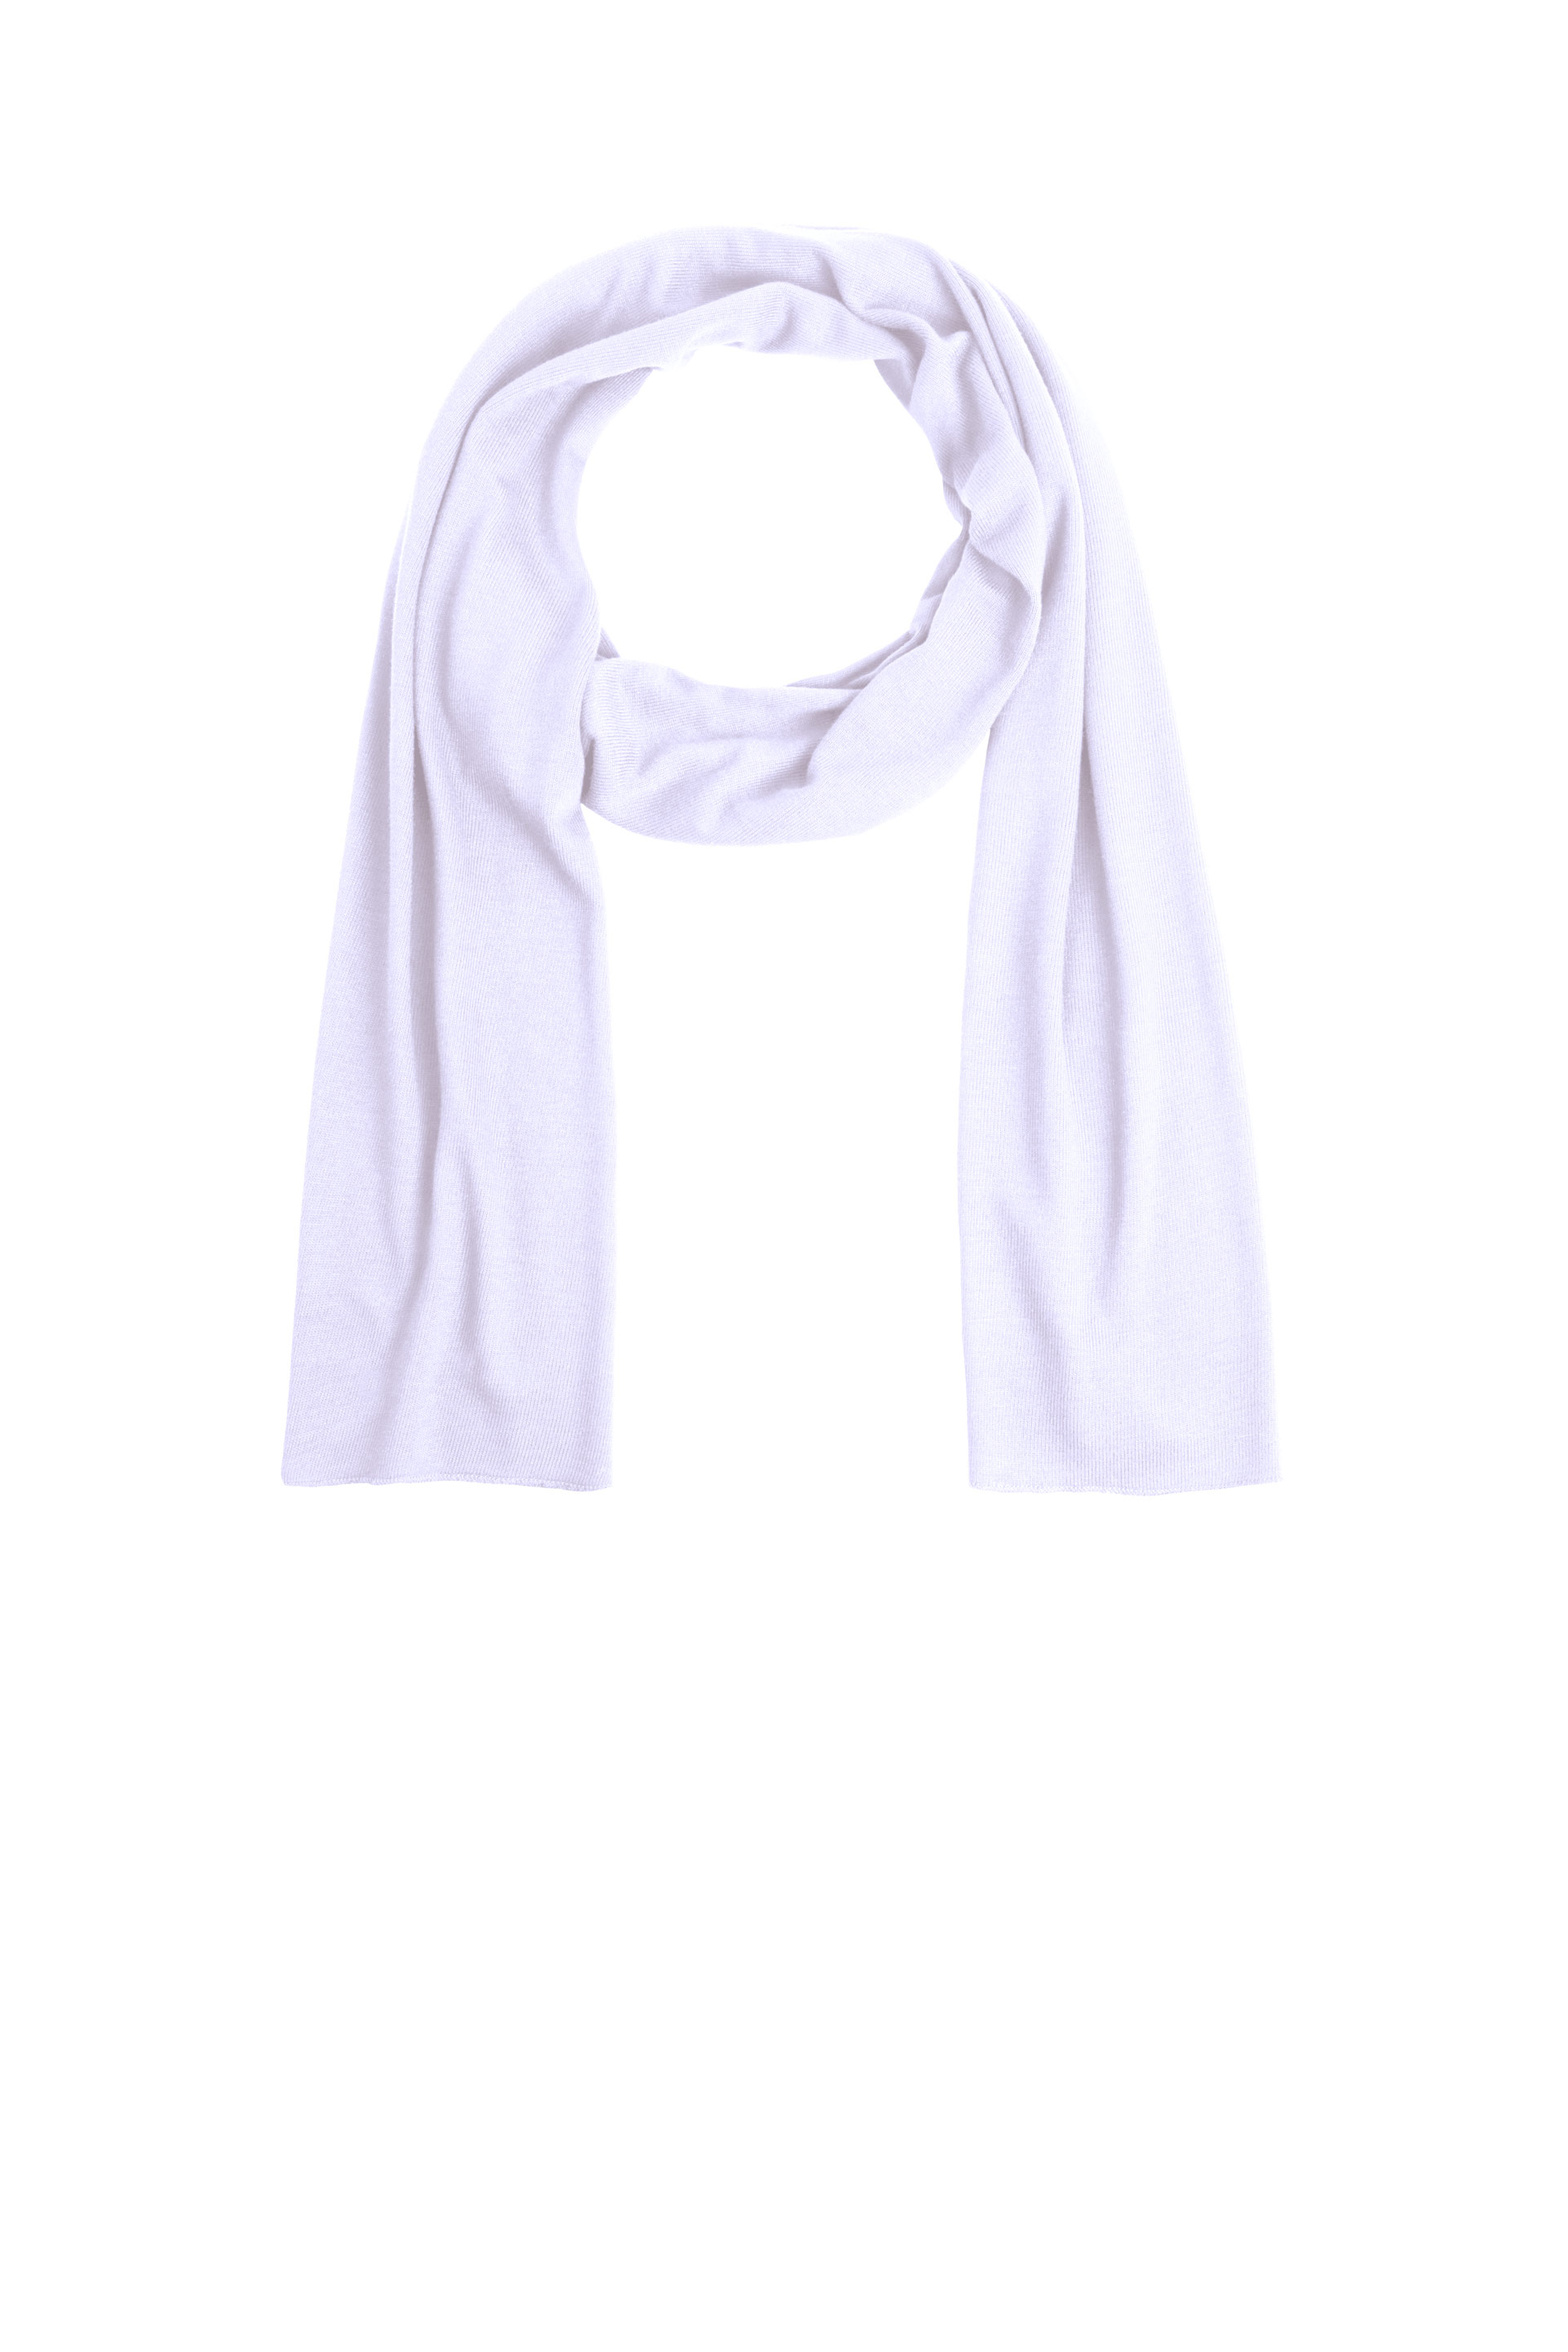 33028_willow_scarf_ice_lavender.jpg